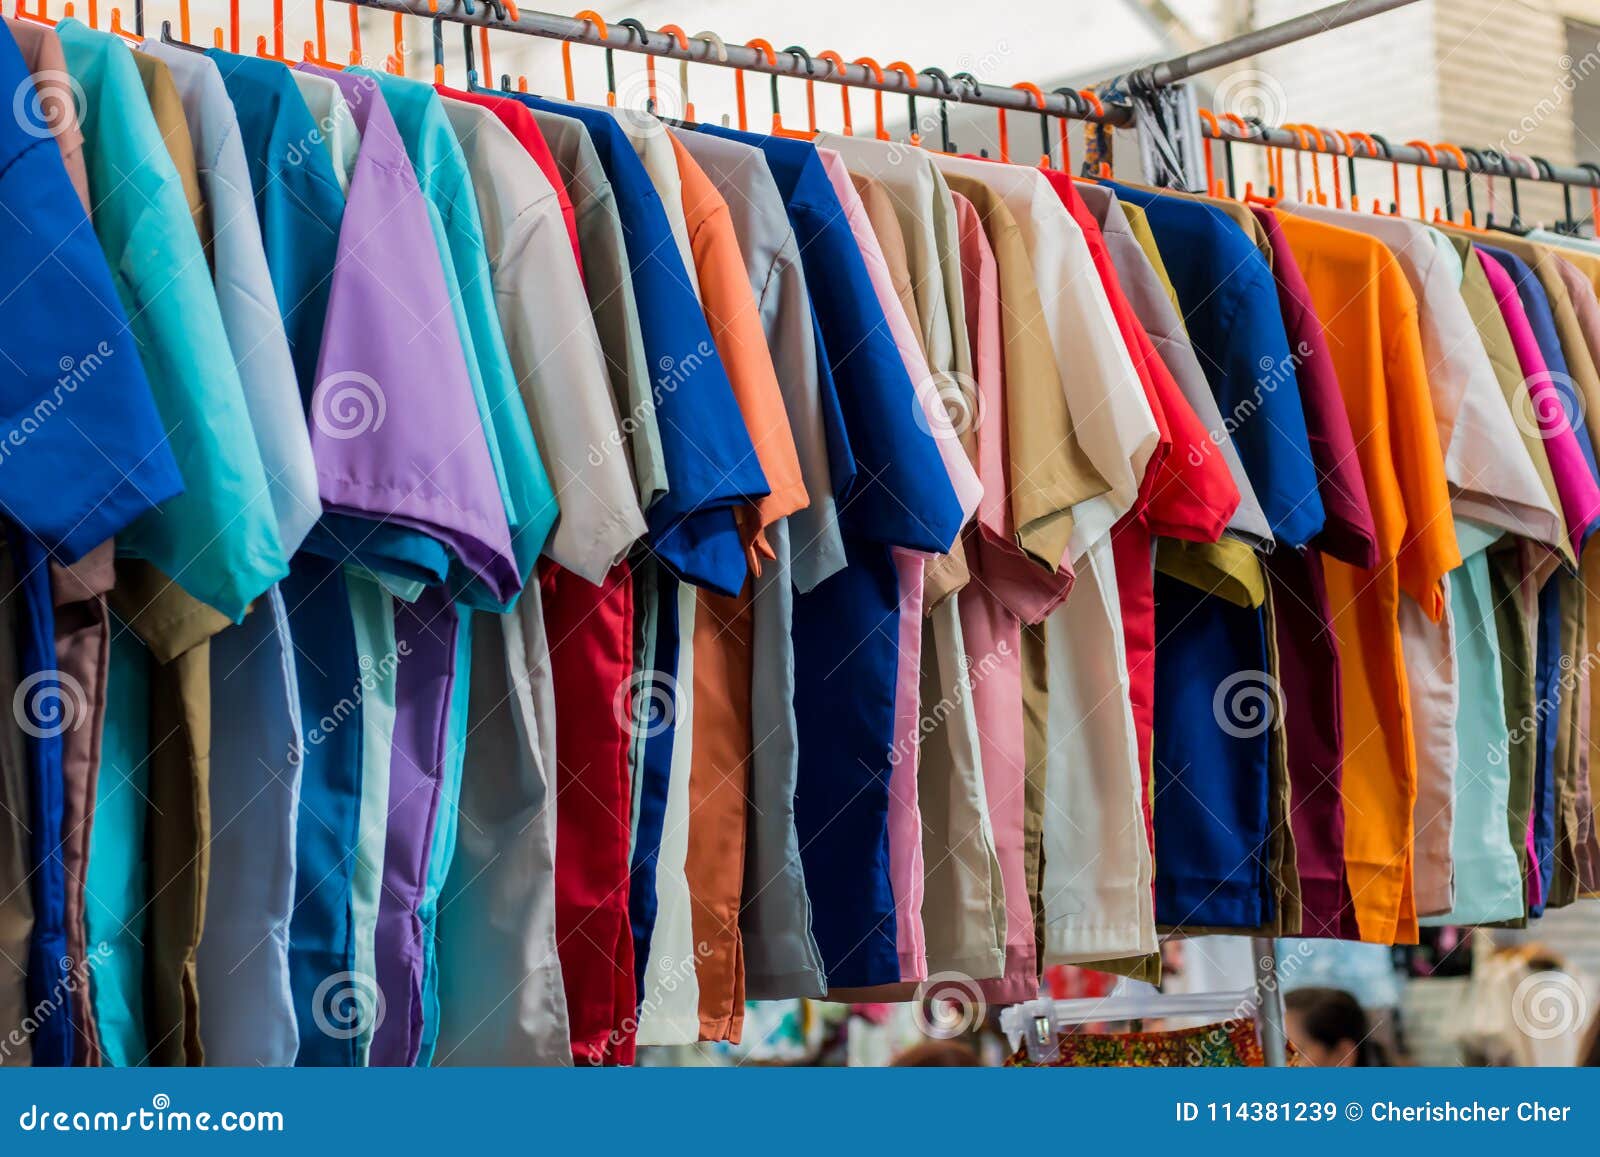 Many Shirts Colorful Hang Selling in the Market. Stock Image - Image of ...